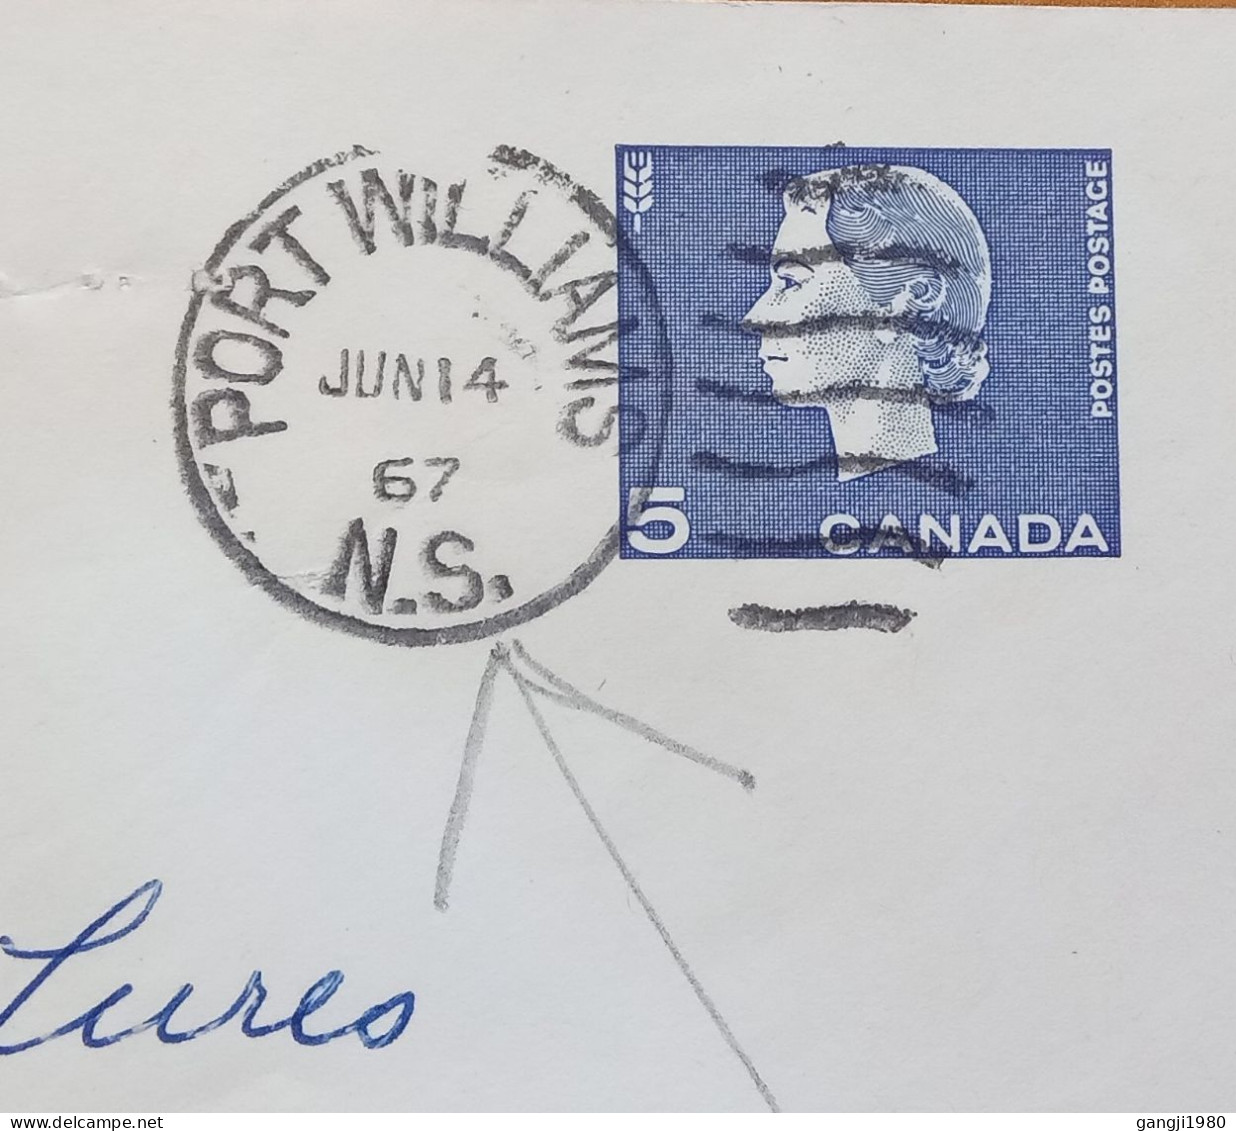 CANADA 1967, POSTAL STATIONERY, COVER USED, QUEEN PORTRAIT,  PORT WILLIAMS CITY CANCEL. - Storia Postale